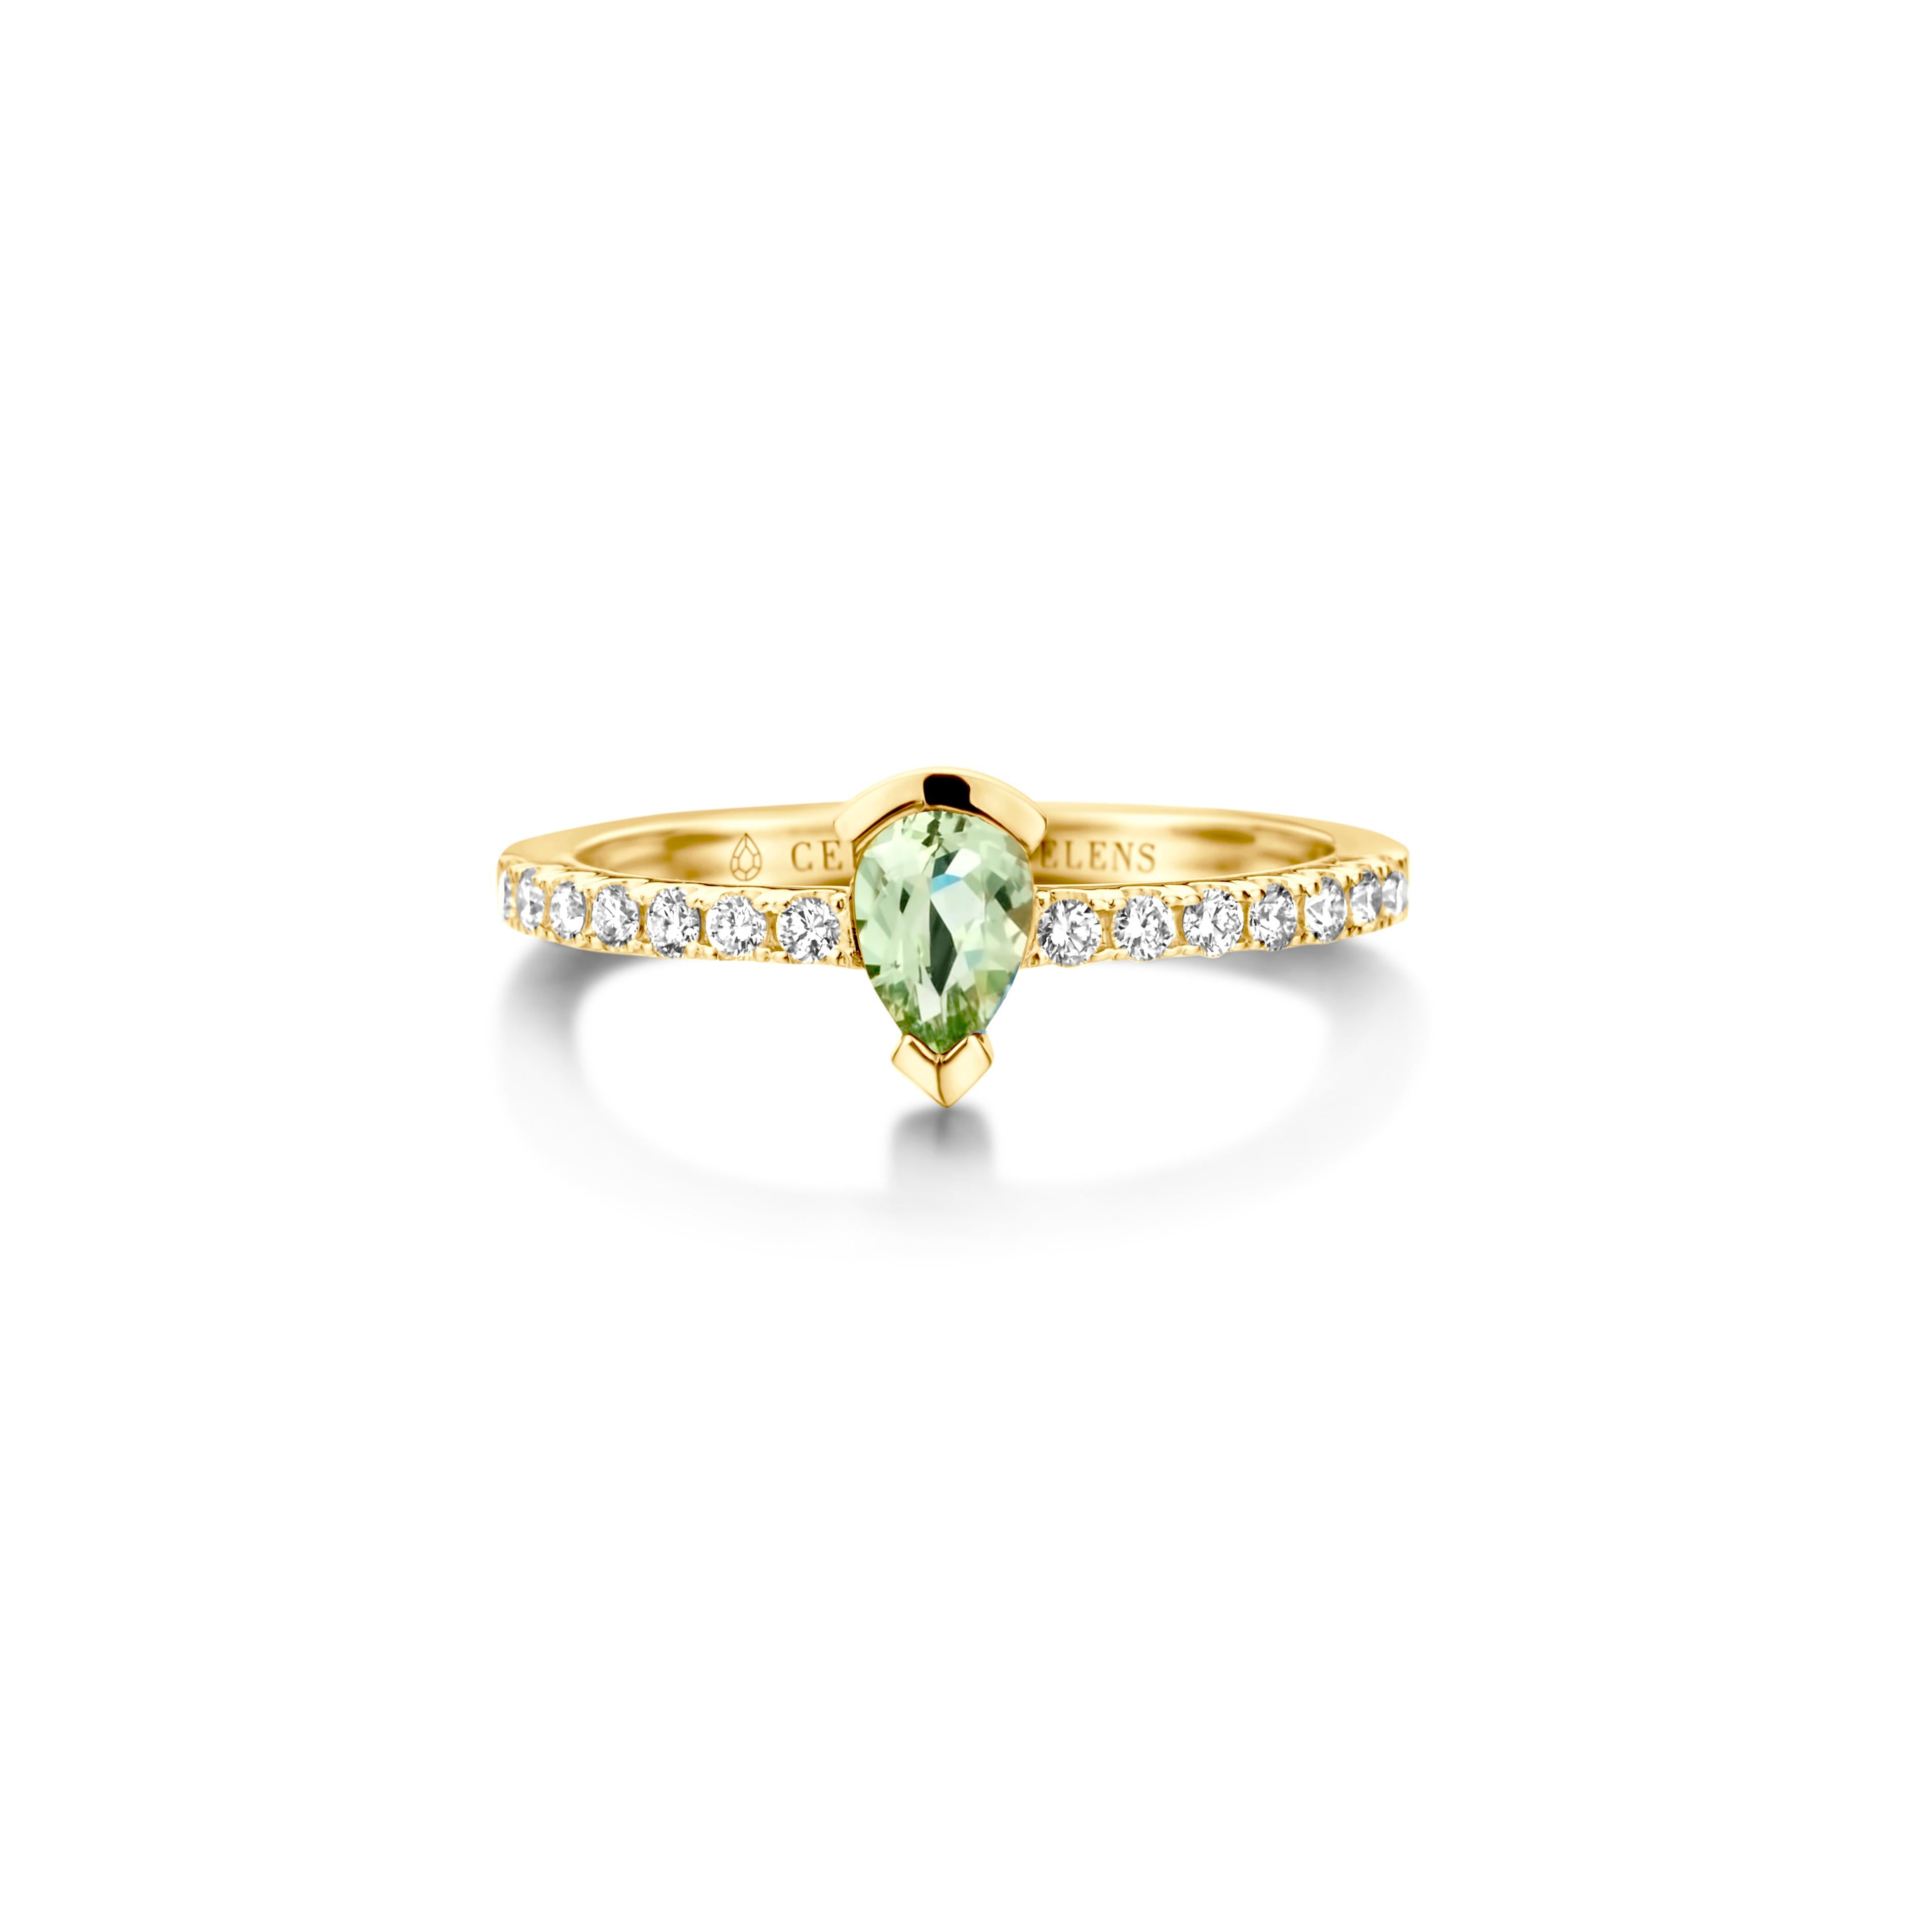 Adeline Straight ring in 18Kt white gold set with a pear-shaped green beryl and 0,24 Ct of white brilliant cut diamonds - VS F quality. Also, available in yellow gold and white gold. Celine Roelens, a goldsmith and gemologist, is specialized in